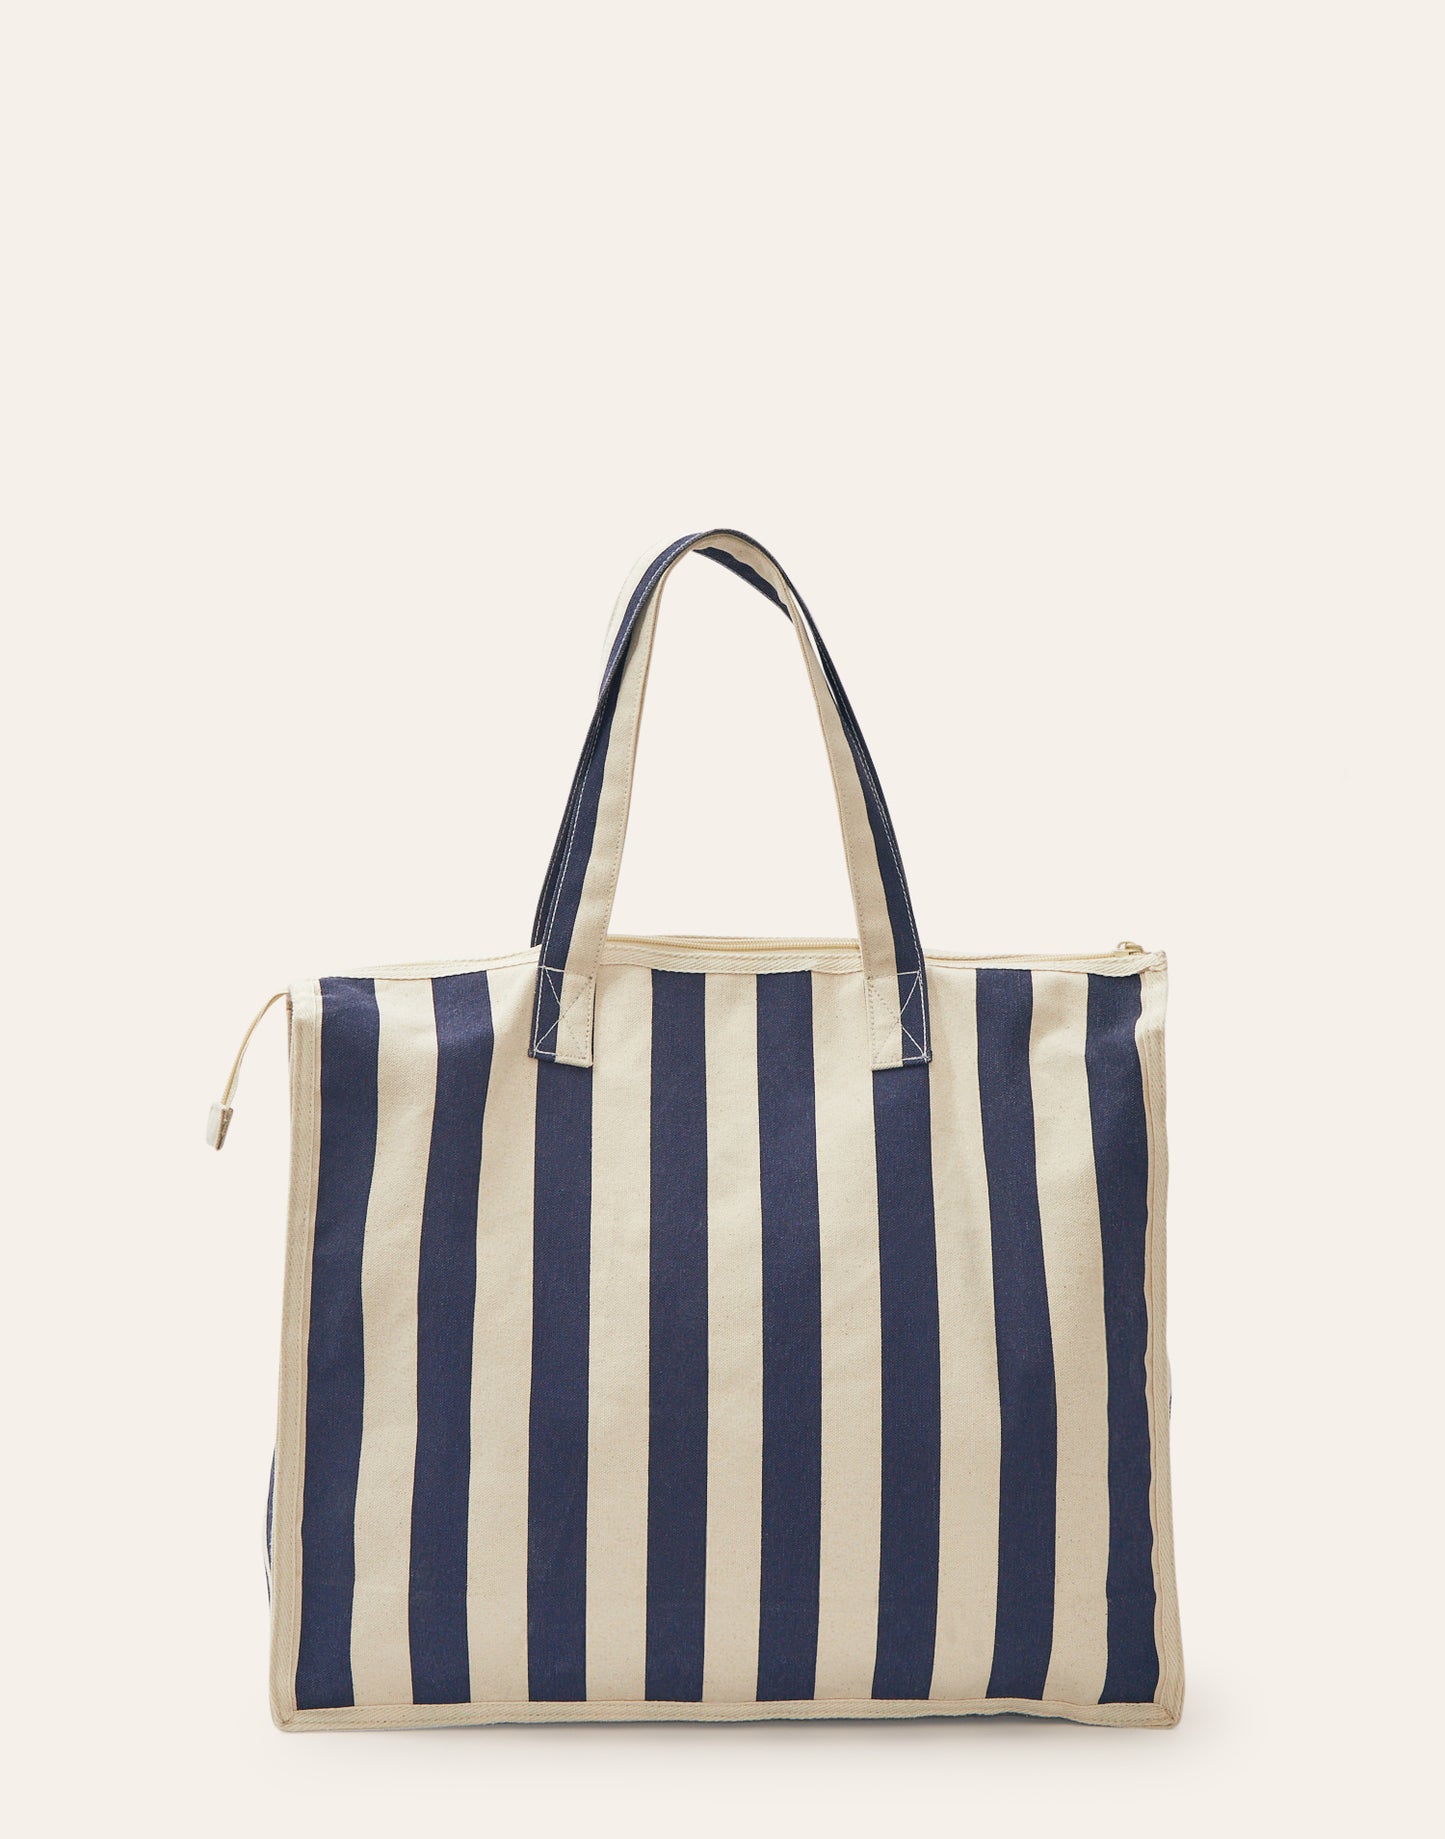 Striped bag with pockets